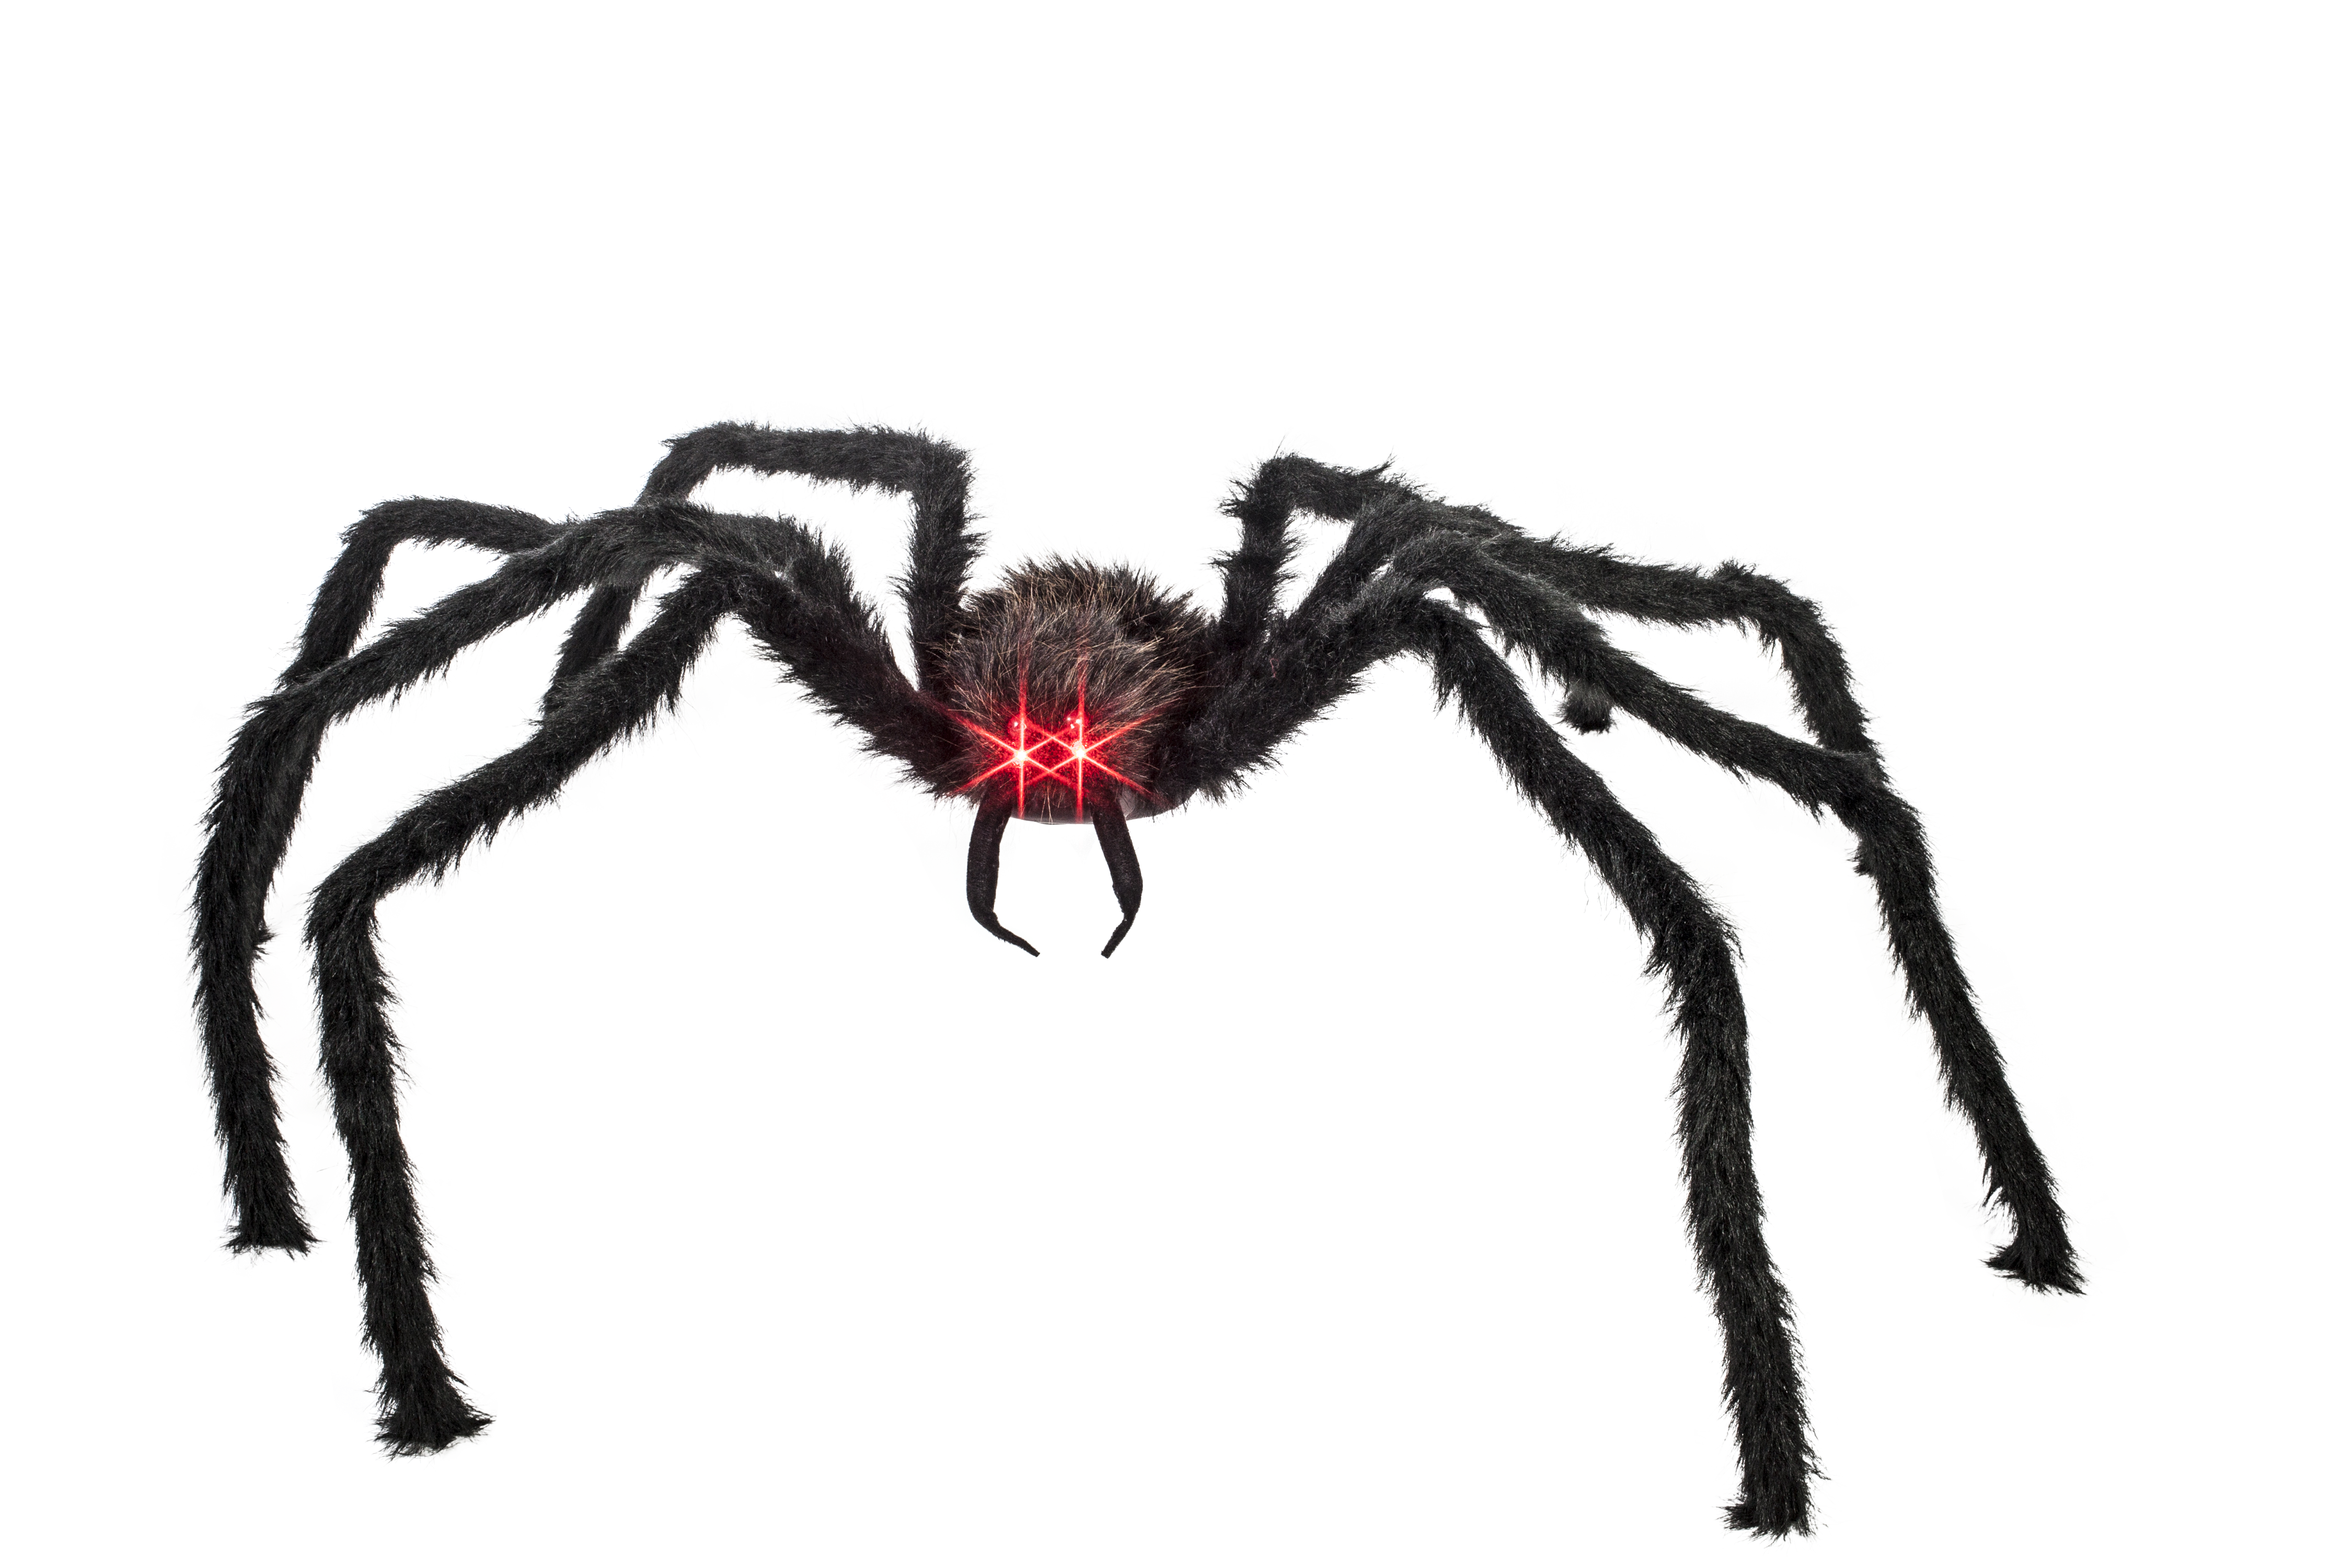 Giant Spider with lighted red eyes (Case of 3) M0006